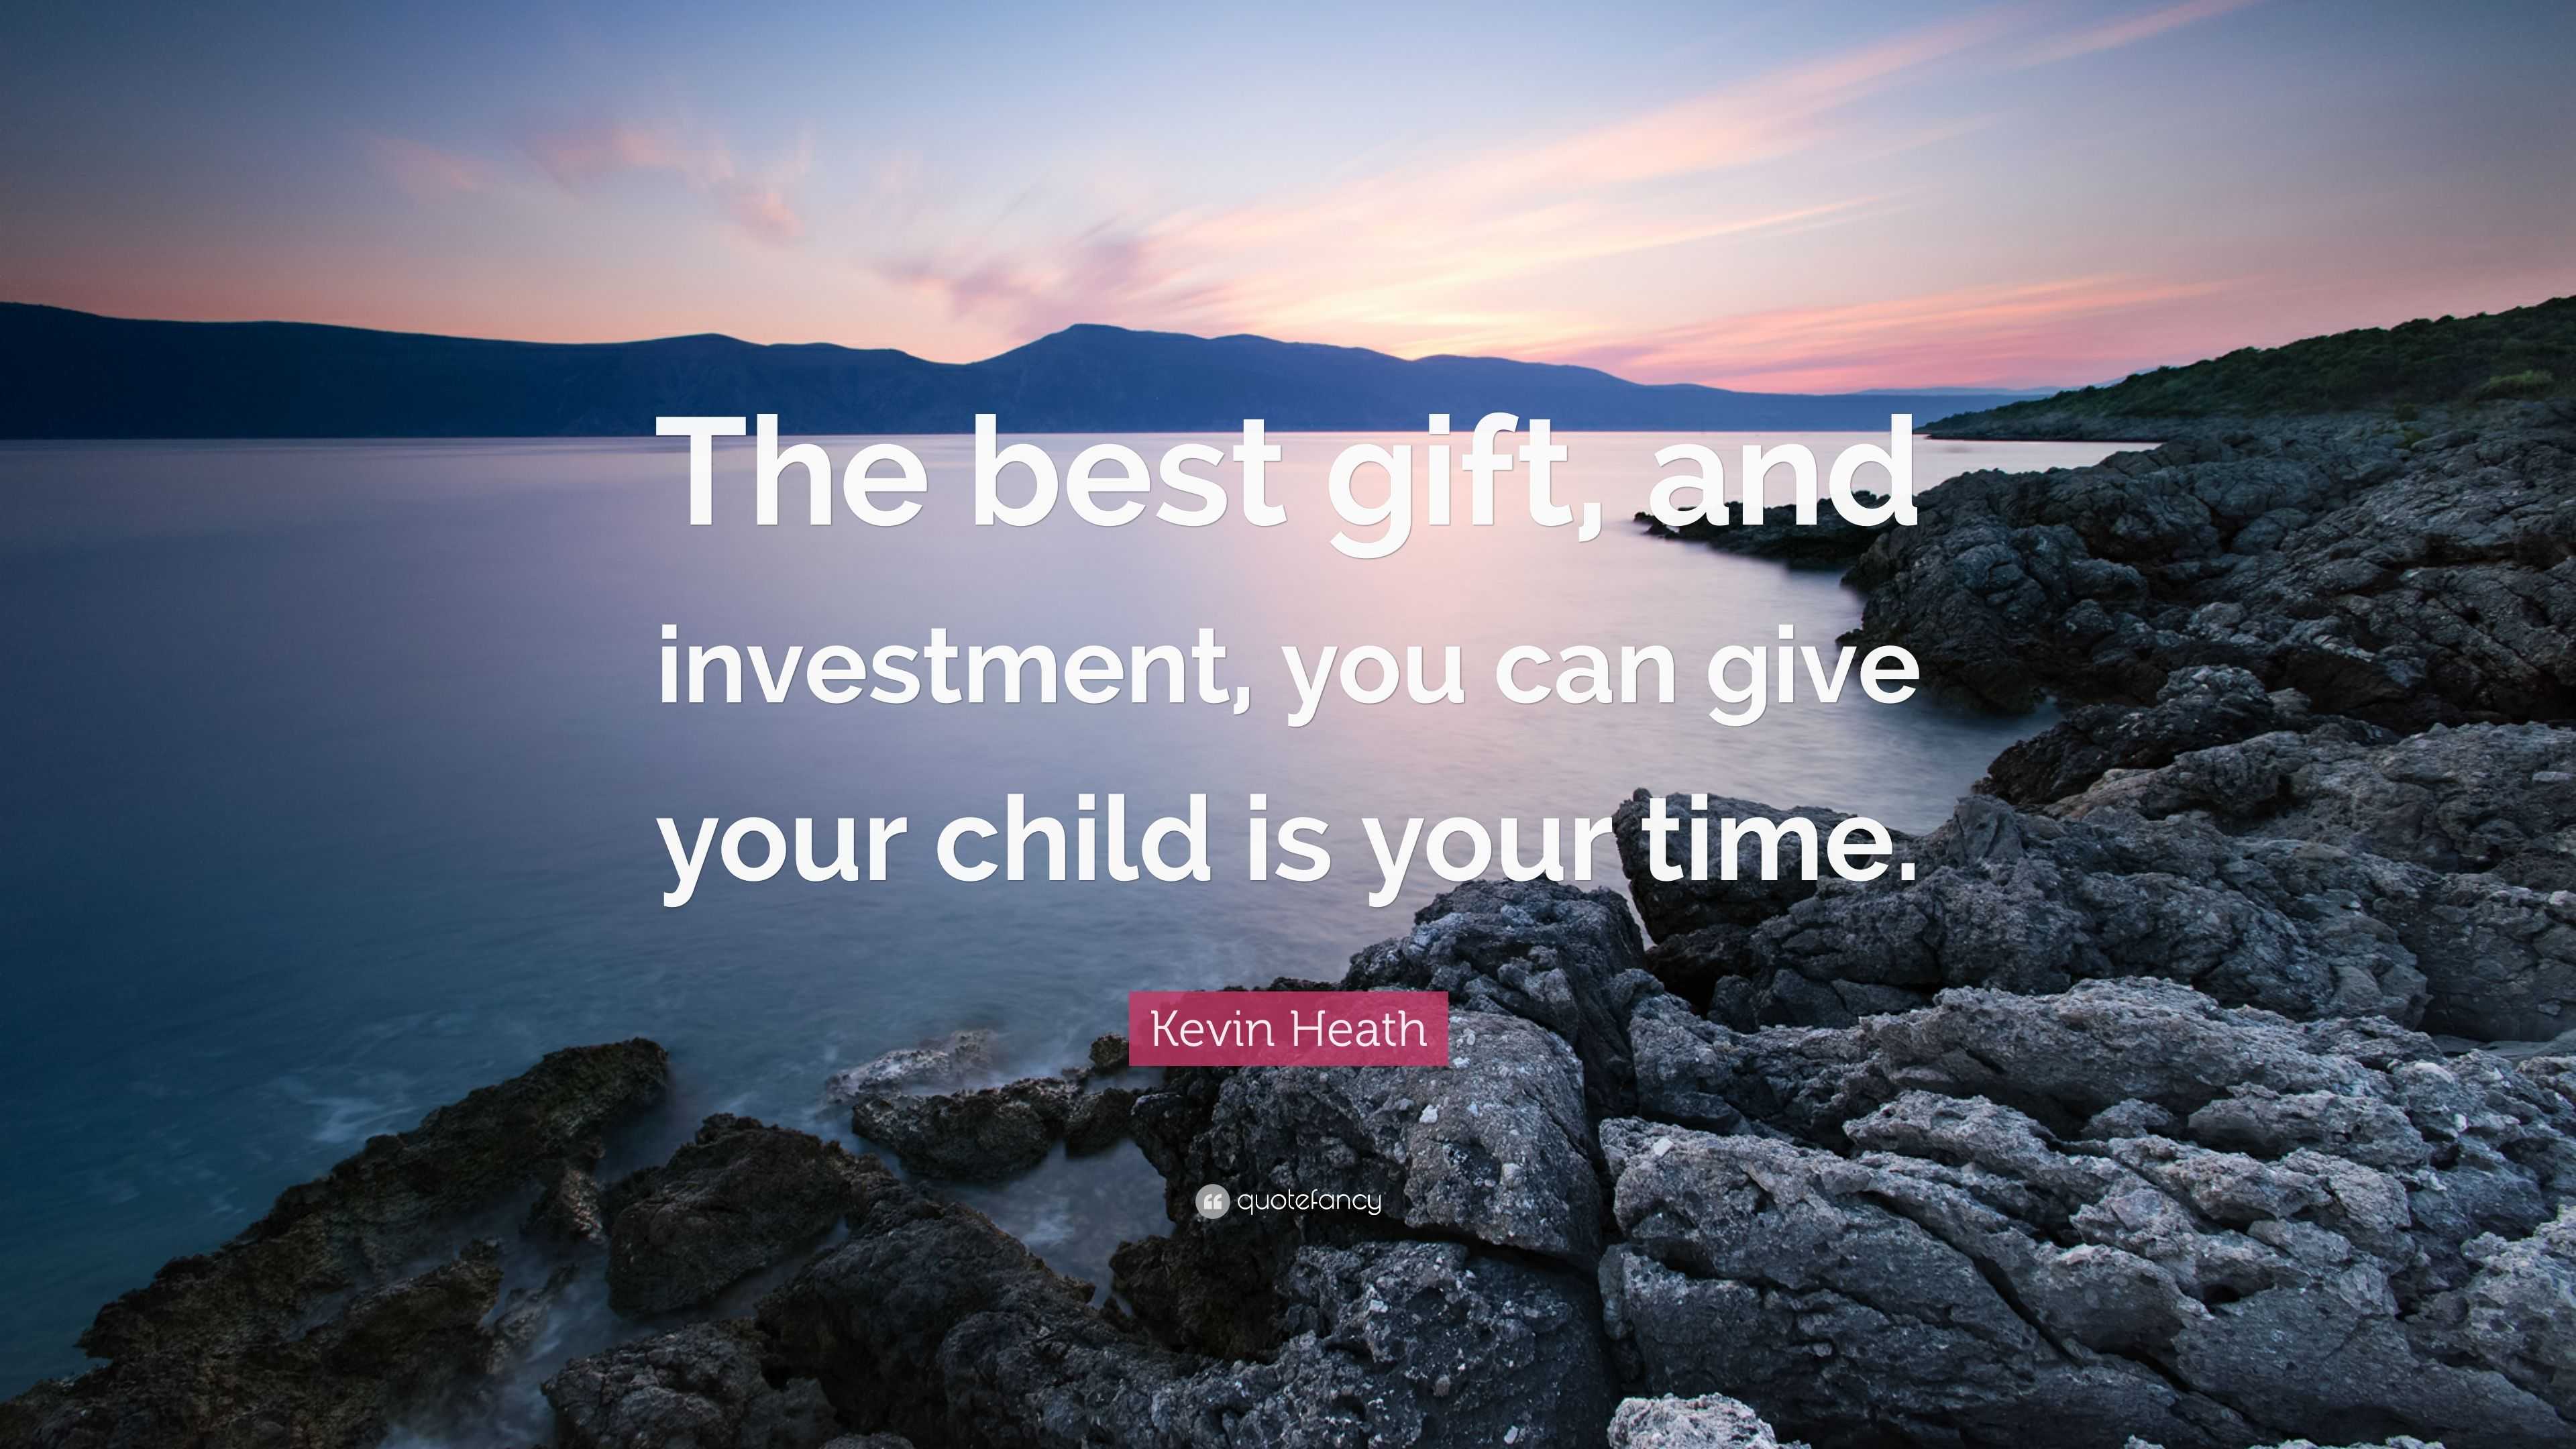 https://quotefancy.com/media/wallpaper/3840x2160/5275470-Kevin-Heath-Quote-The-best-gift-and-investment-you-can-give-your.jpg